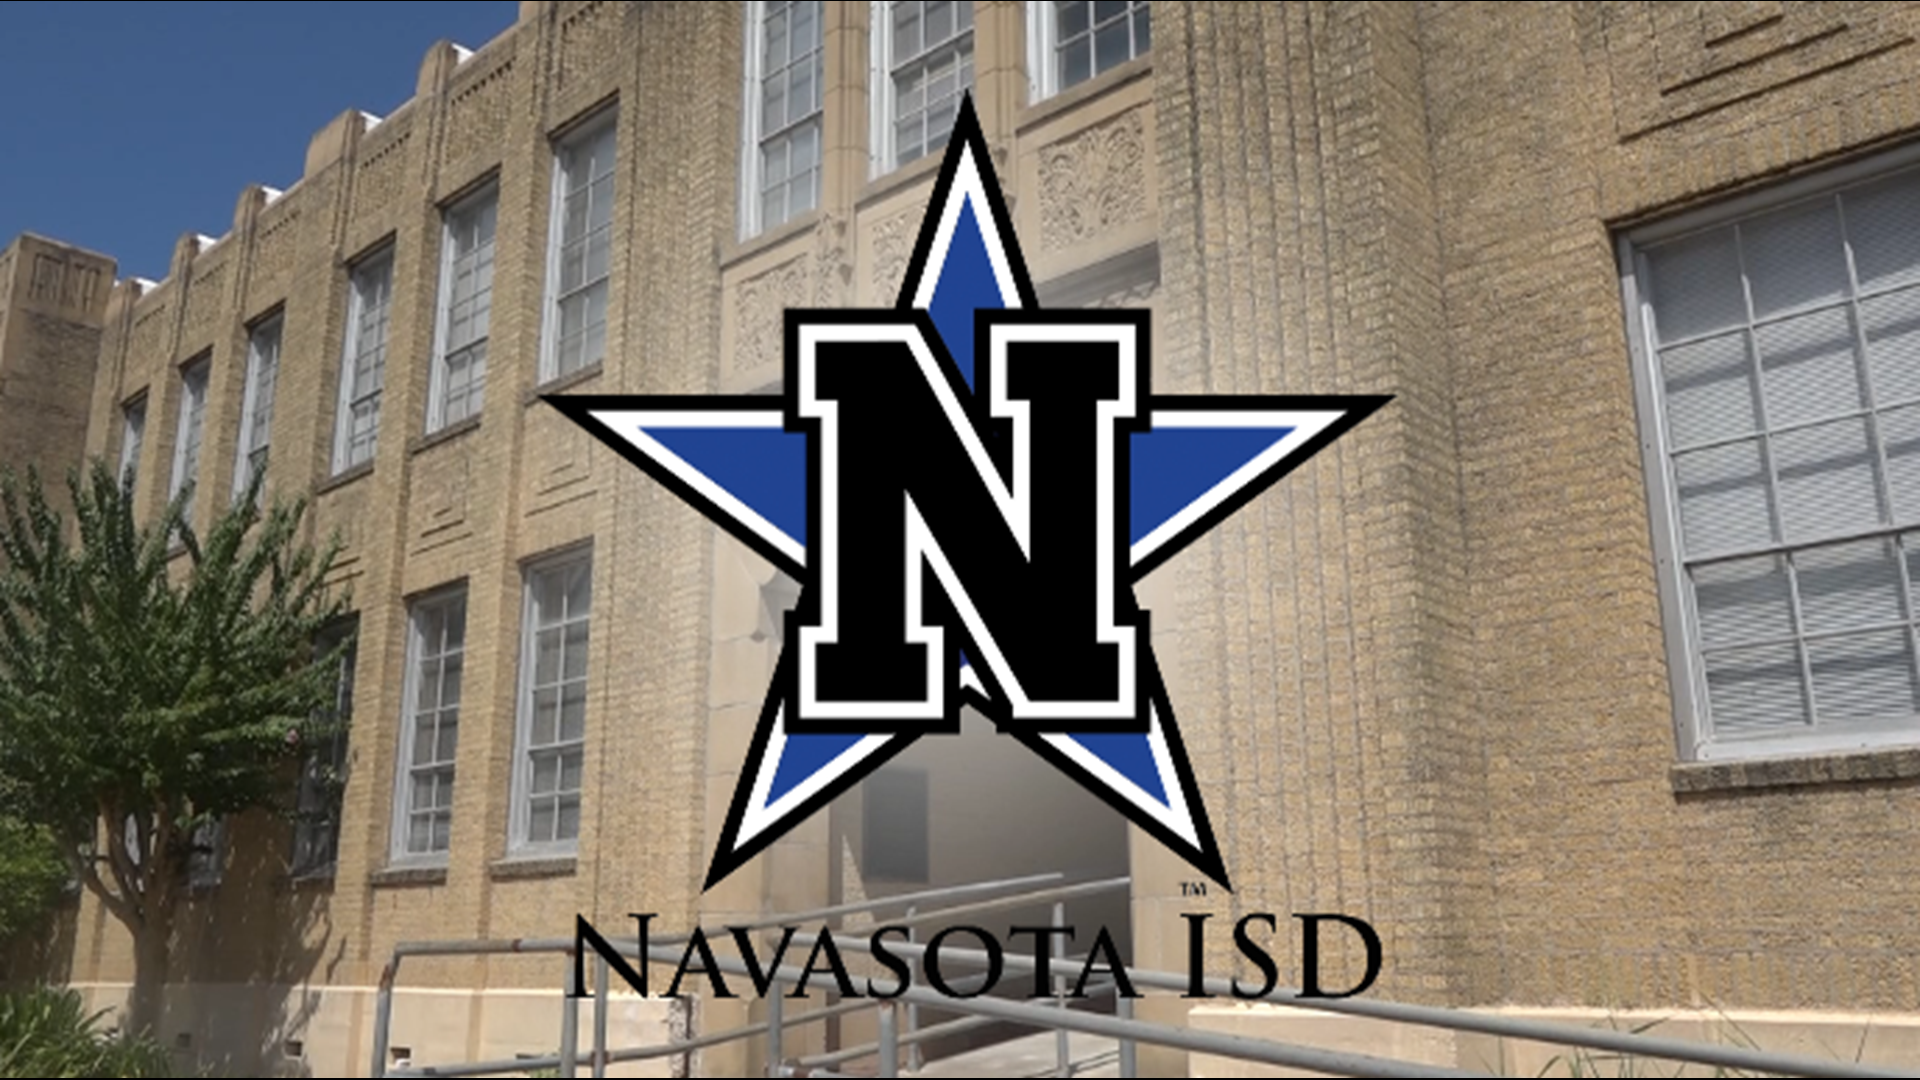 We have an update on Navasota ISD's Guardian Plan, which allows districts to hand pick staff who can carry firearms on school grounds.